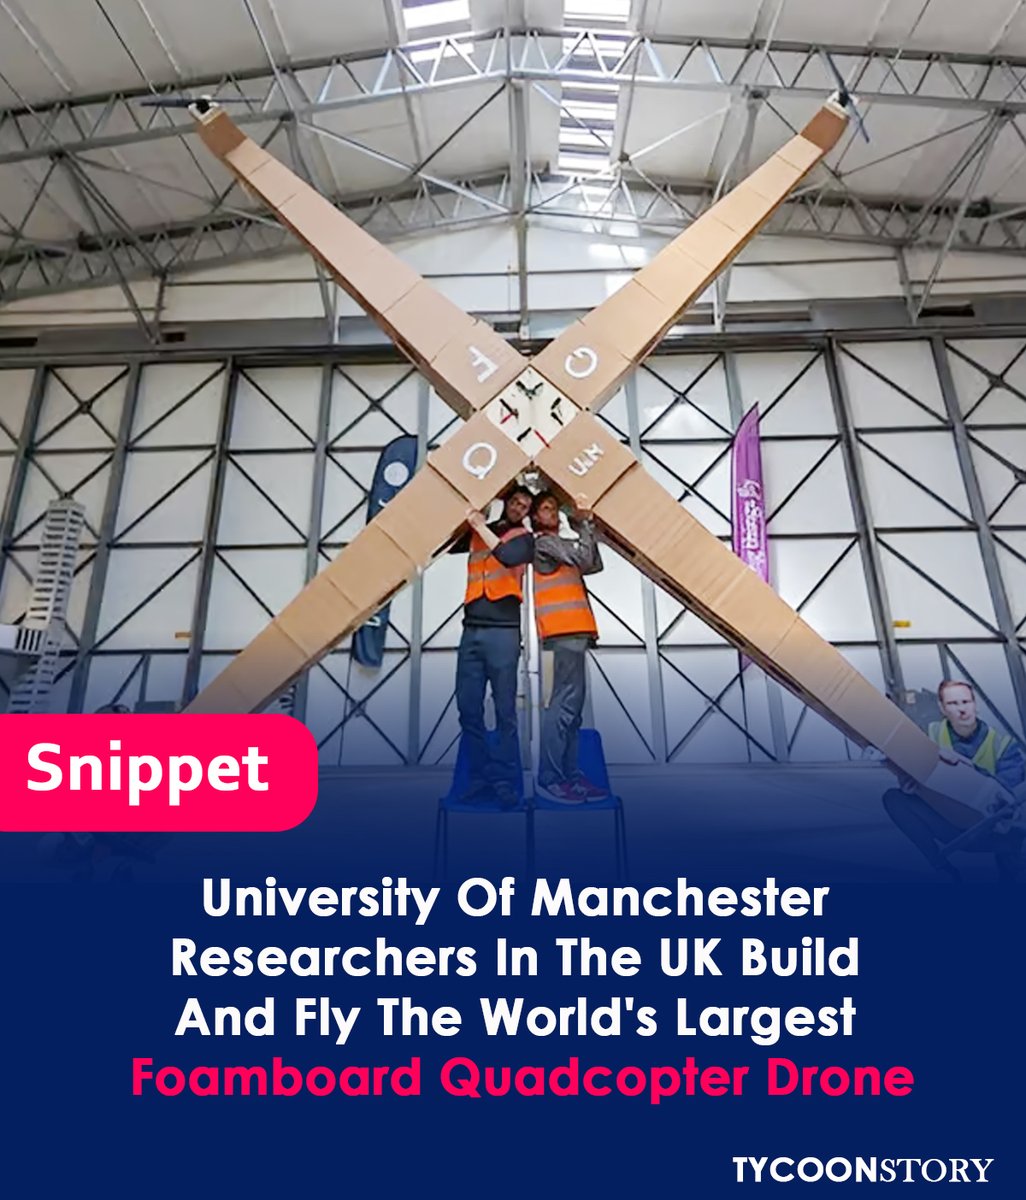 World's Largest Quadcopter Drone Is Designed And Flown By Researchers.
#WorldsLargestQuadcopter #GiantQuadcopter #FoamboardDrone #ManchesterResearchers #DroneTechnology #AerospaceEngineering #WorldRecord #DroneInnovation #DroneFlights #DronePhotography #DroneVideo #UAV